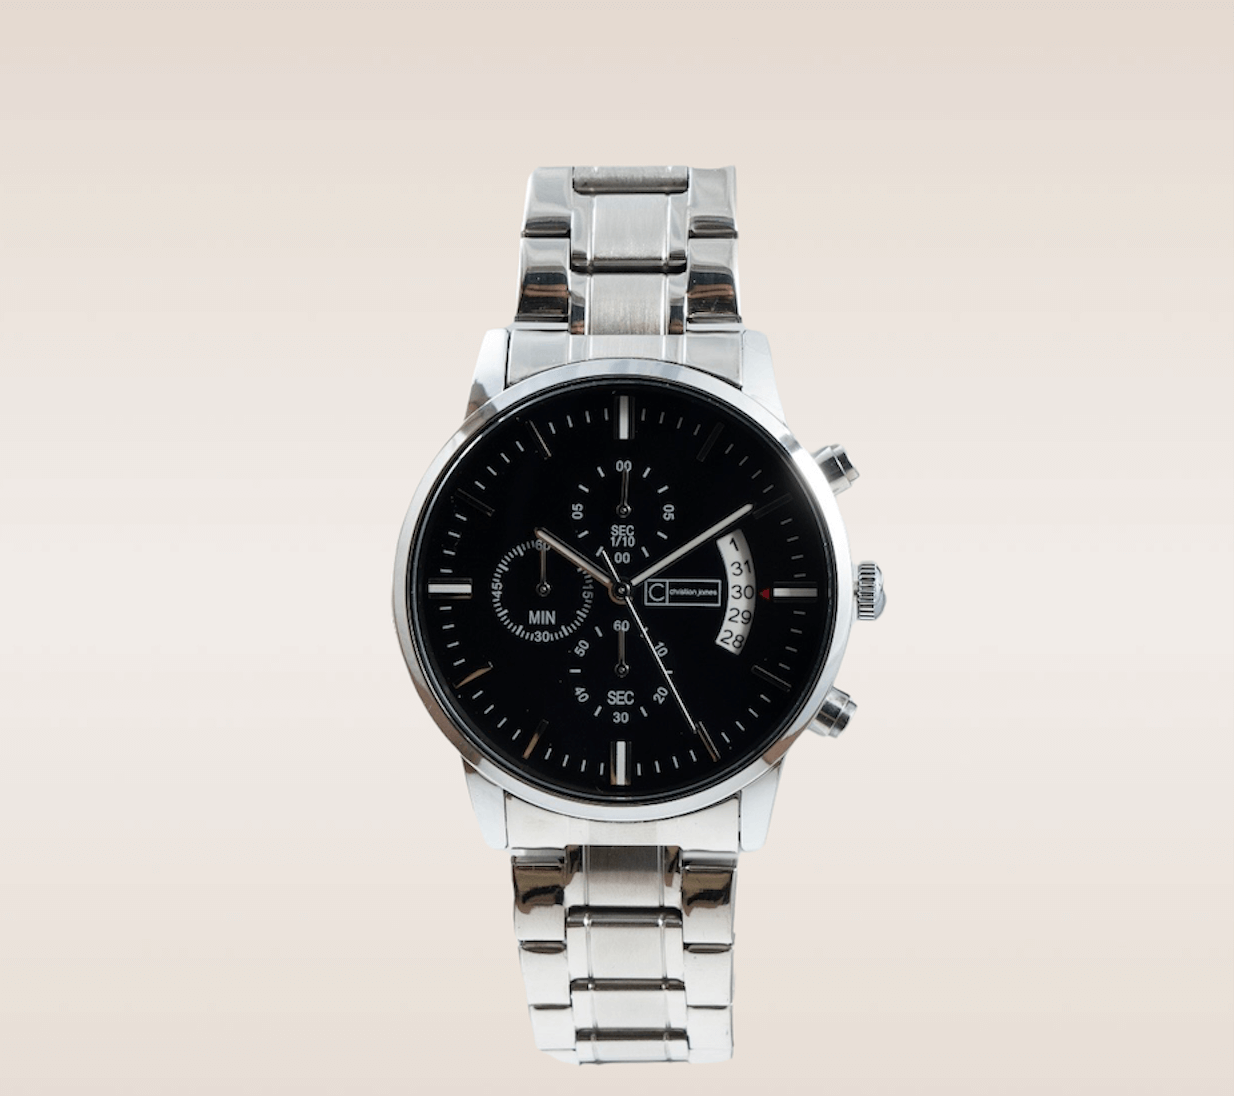 In this up-close shot, we are introduced to the captivating Oynx Timepiece, an embodiment of sleek sophistication and modern aesthetics. The watch features an inky black face that exudes a sense of elegance and mystery. The face is encased in a shining silver casing, creating a striking contrast that commands attention. The clean and minimalistic design of the watch face allows for easy and precise time reading. Complimenting the sleekness, the watch is adorned with a silver link band.